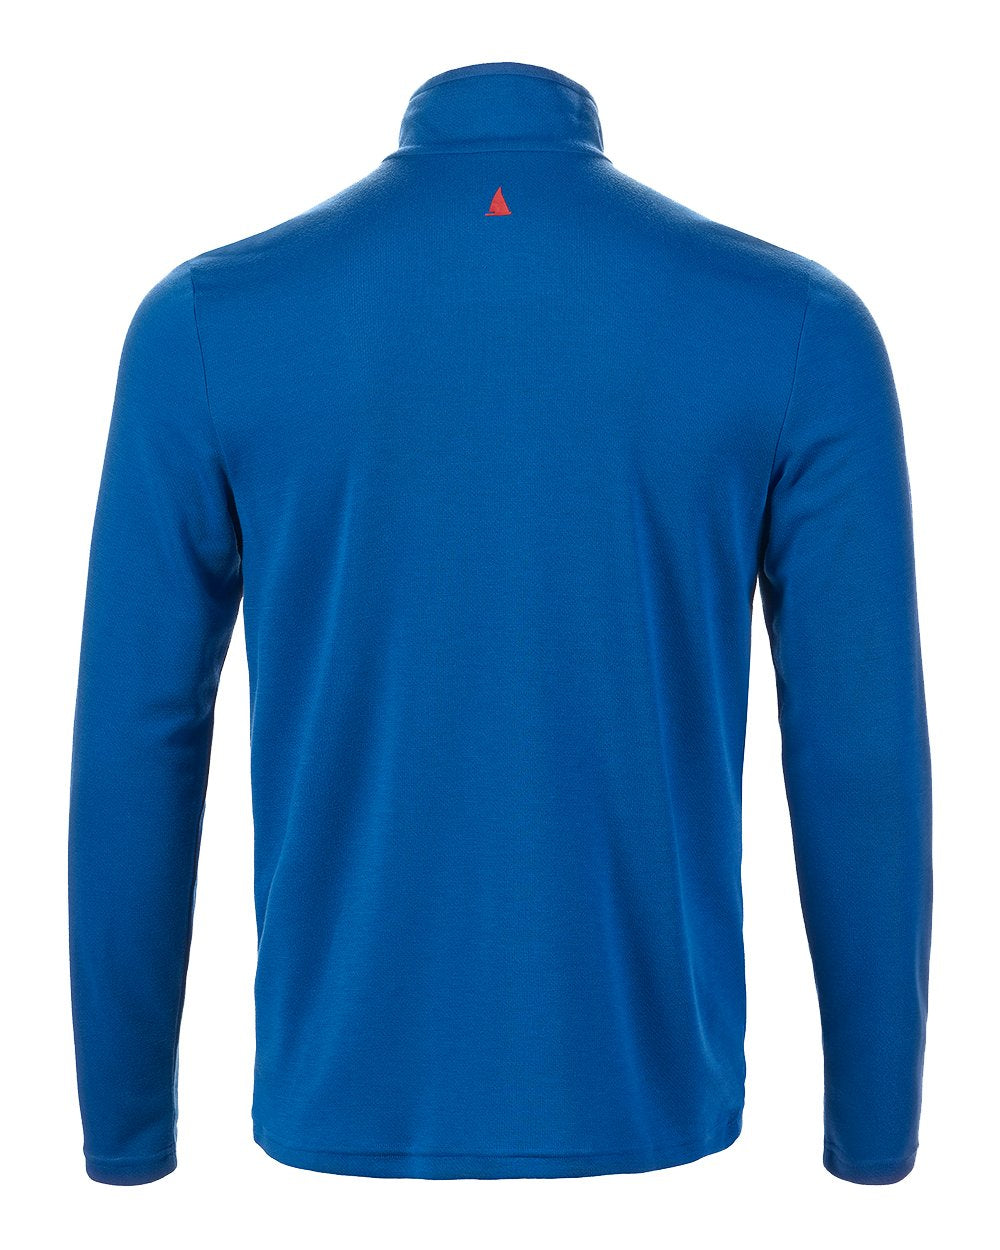 Aruba Blue Coloured Musto Mens Fast Dry Half Zip Top On A White Background 